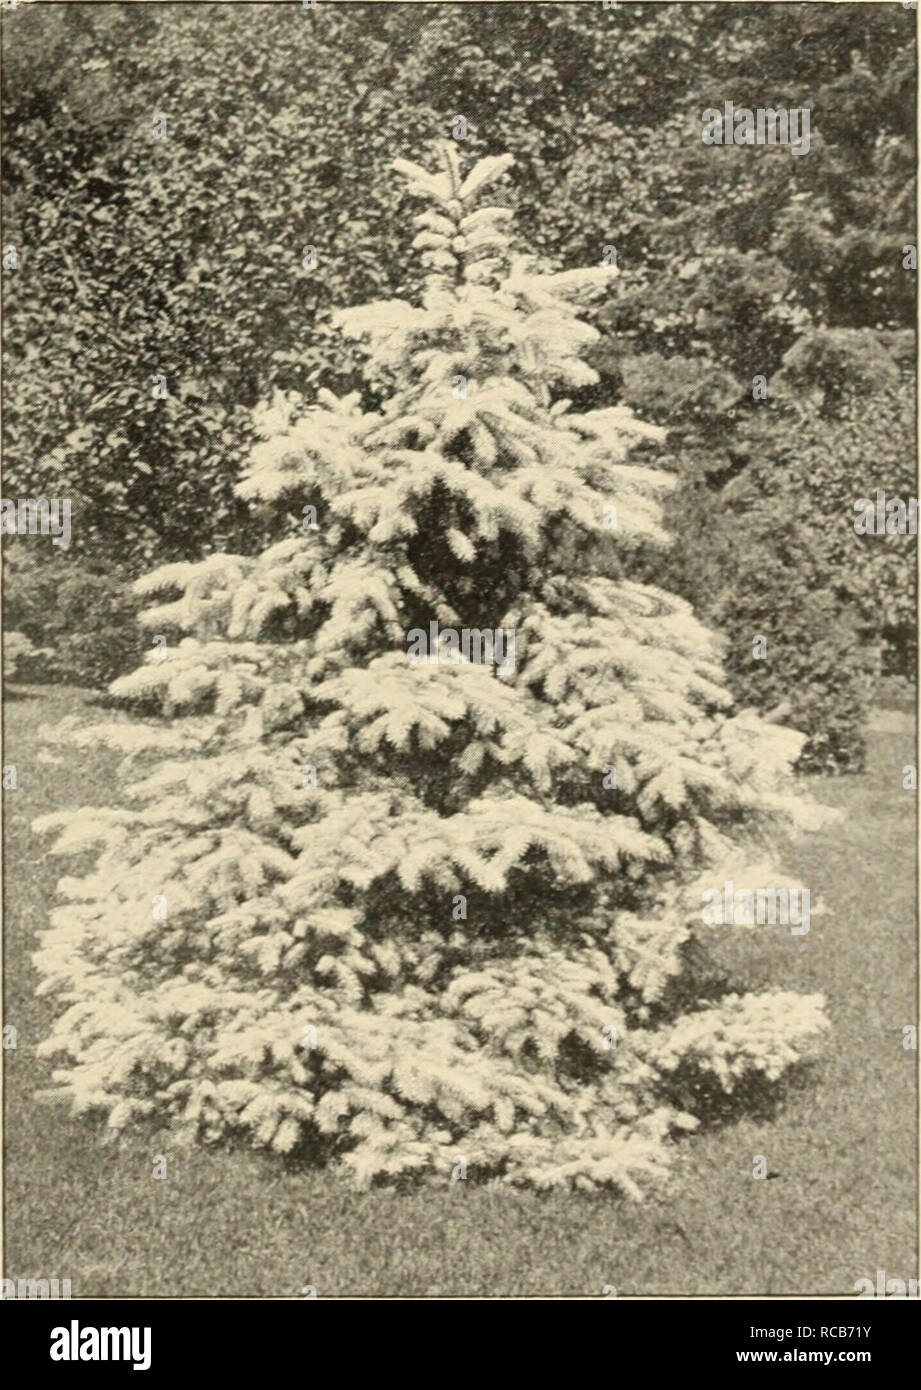 . Ellwanger &amp; Barry : Mount Hope nurseries. GENERAL CATALOGUE. 67 ABIES [including Picea and Tsuga Spruce, Fir and Hemlock. Section i. Abies. Spruce and Hemlock. Tsiiga —the Hemlocks, with flat leaves Leaves needle shaped, scattered all around the shoots {inclndiug -mostly two ranked). A. alba. White Spruce. A. A native tree of medium size, varying in height from 25 to 50 feet, of pTamidaI form. FoUage silvery gray, and bark light colored. Very hardy and valuable. 50c. tvar. caerulea. The Glaucous Spruce. B. A small and beautiful variety, of rather loose spread- ing habit, with bluish gr Stock Photo